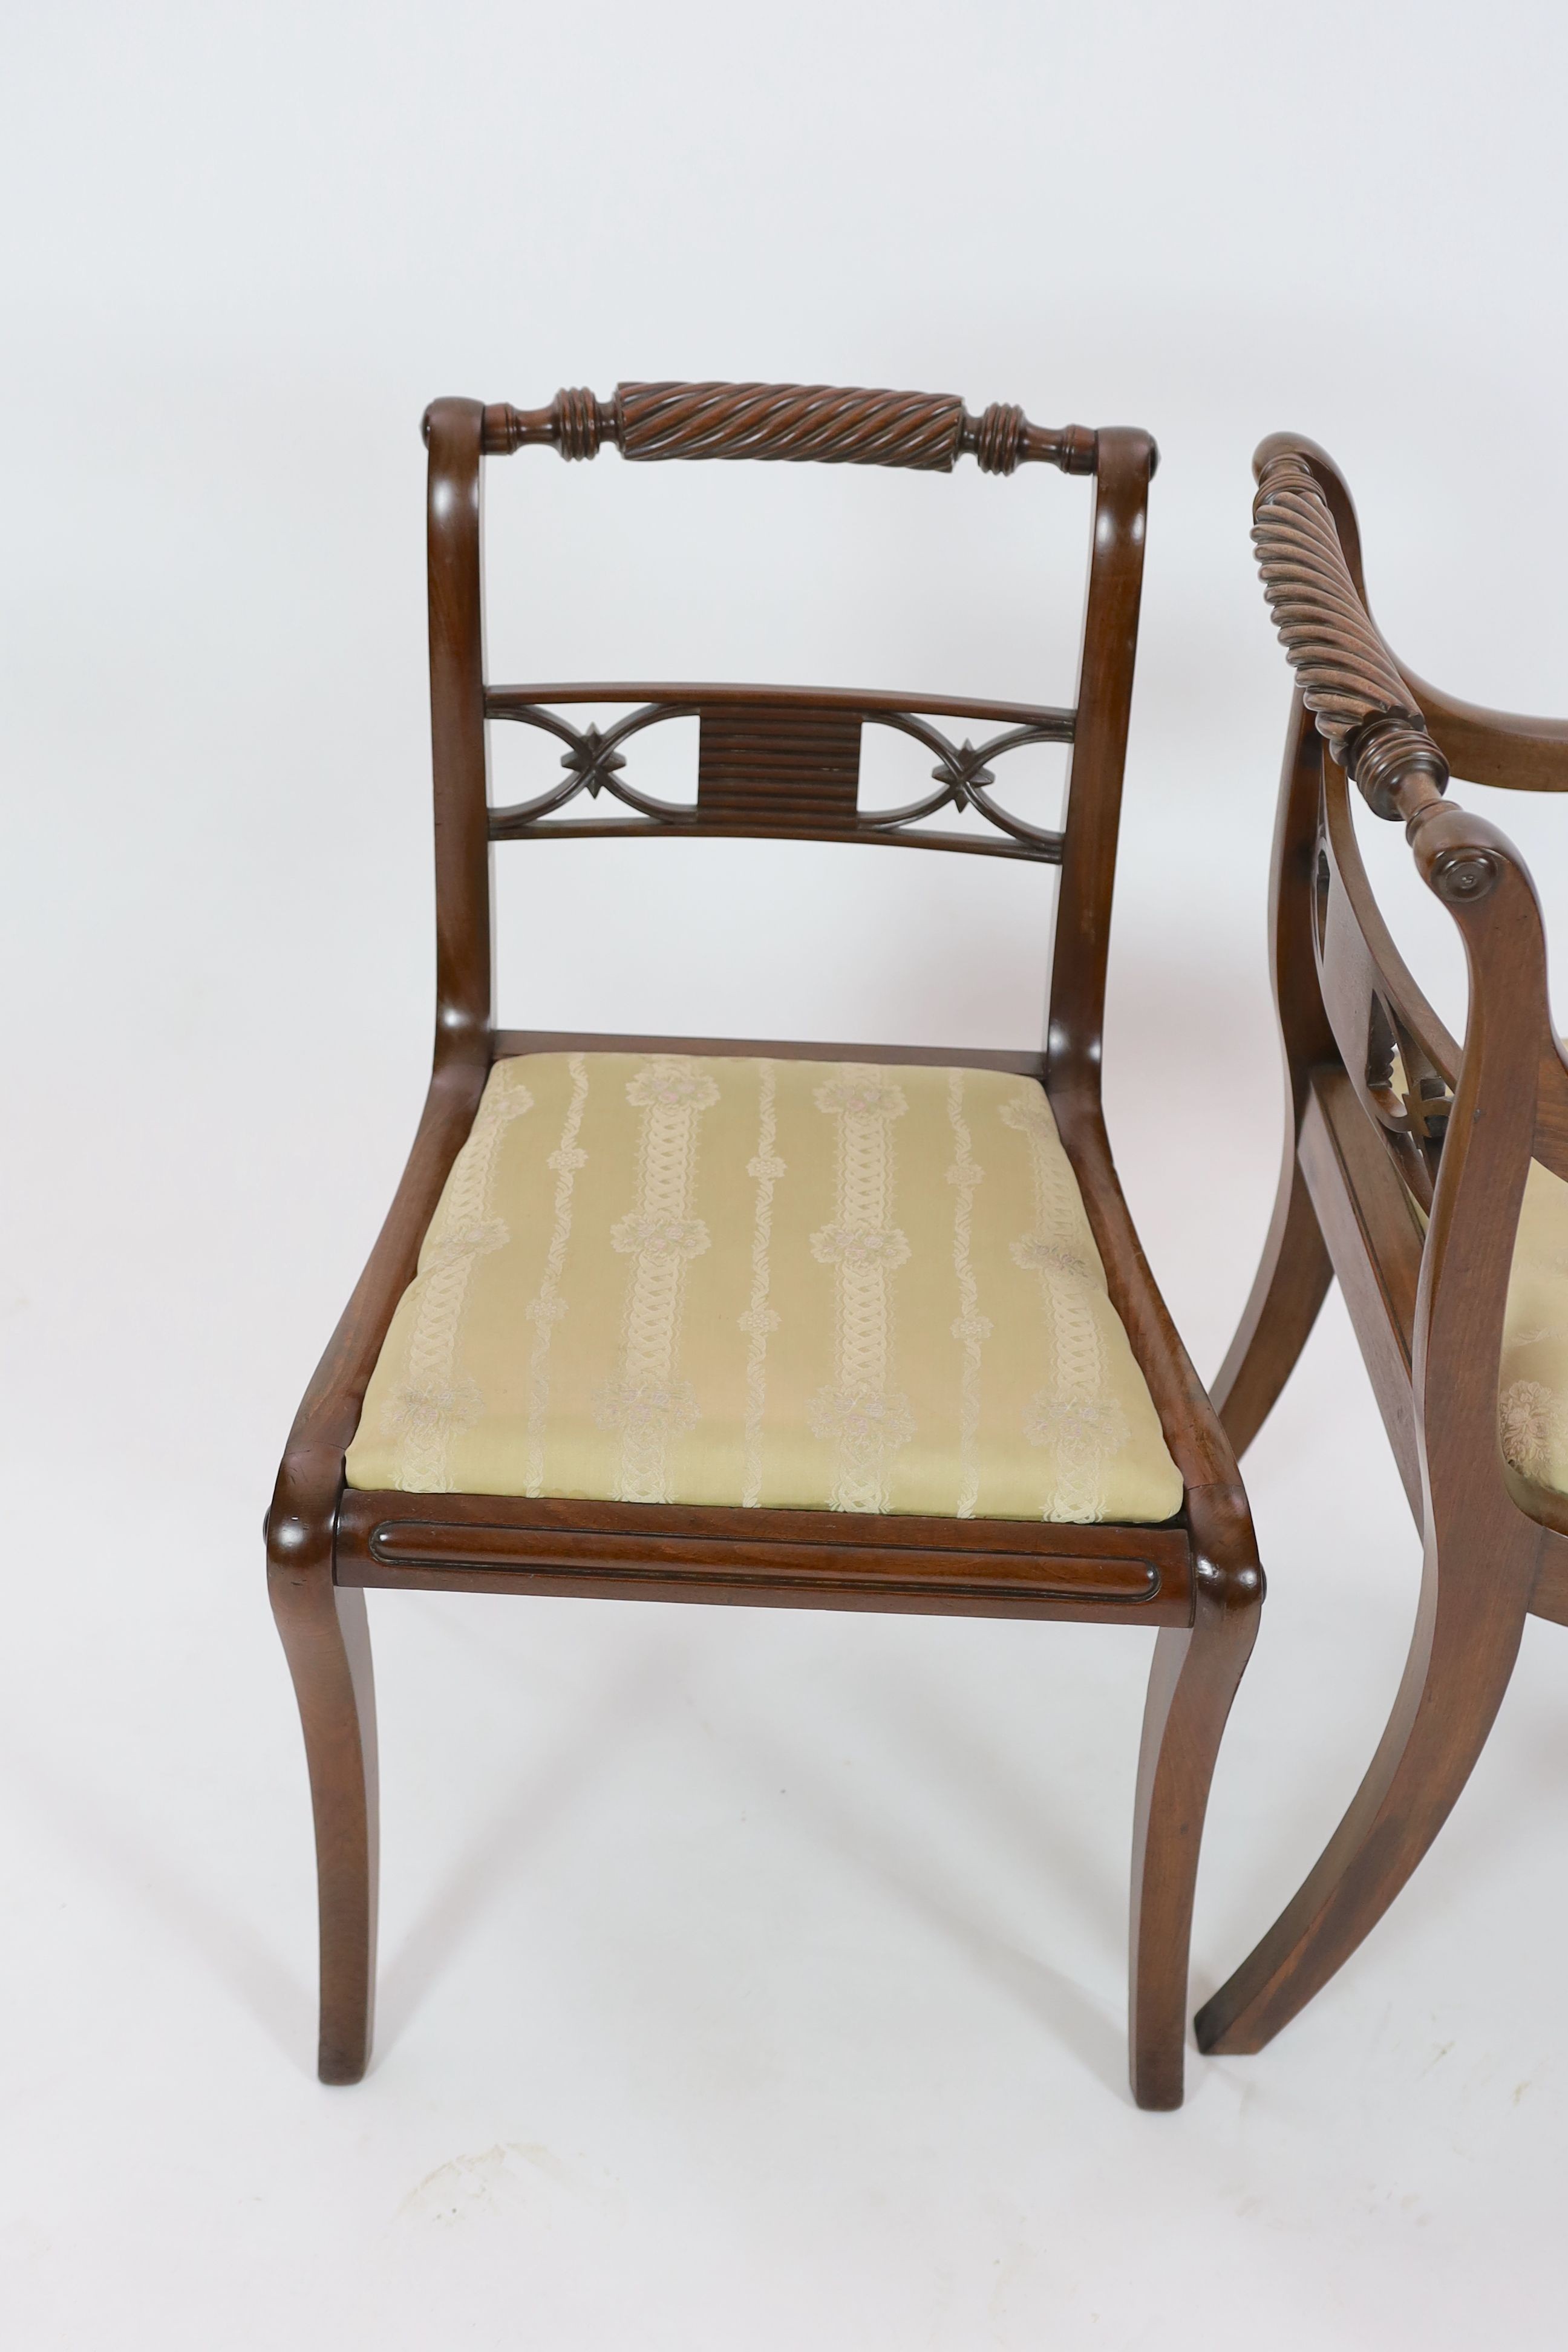 A set of eight Regency mahogany dining chairs, including two carvers, carvers W.54cm D.56cm H.84cm